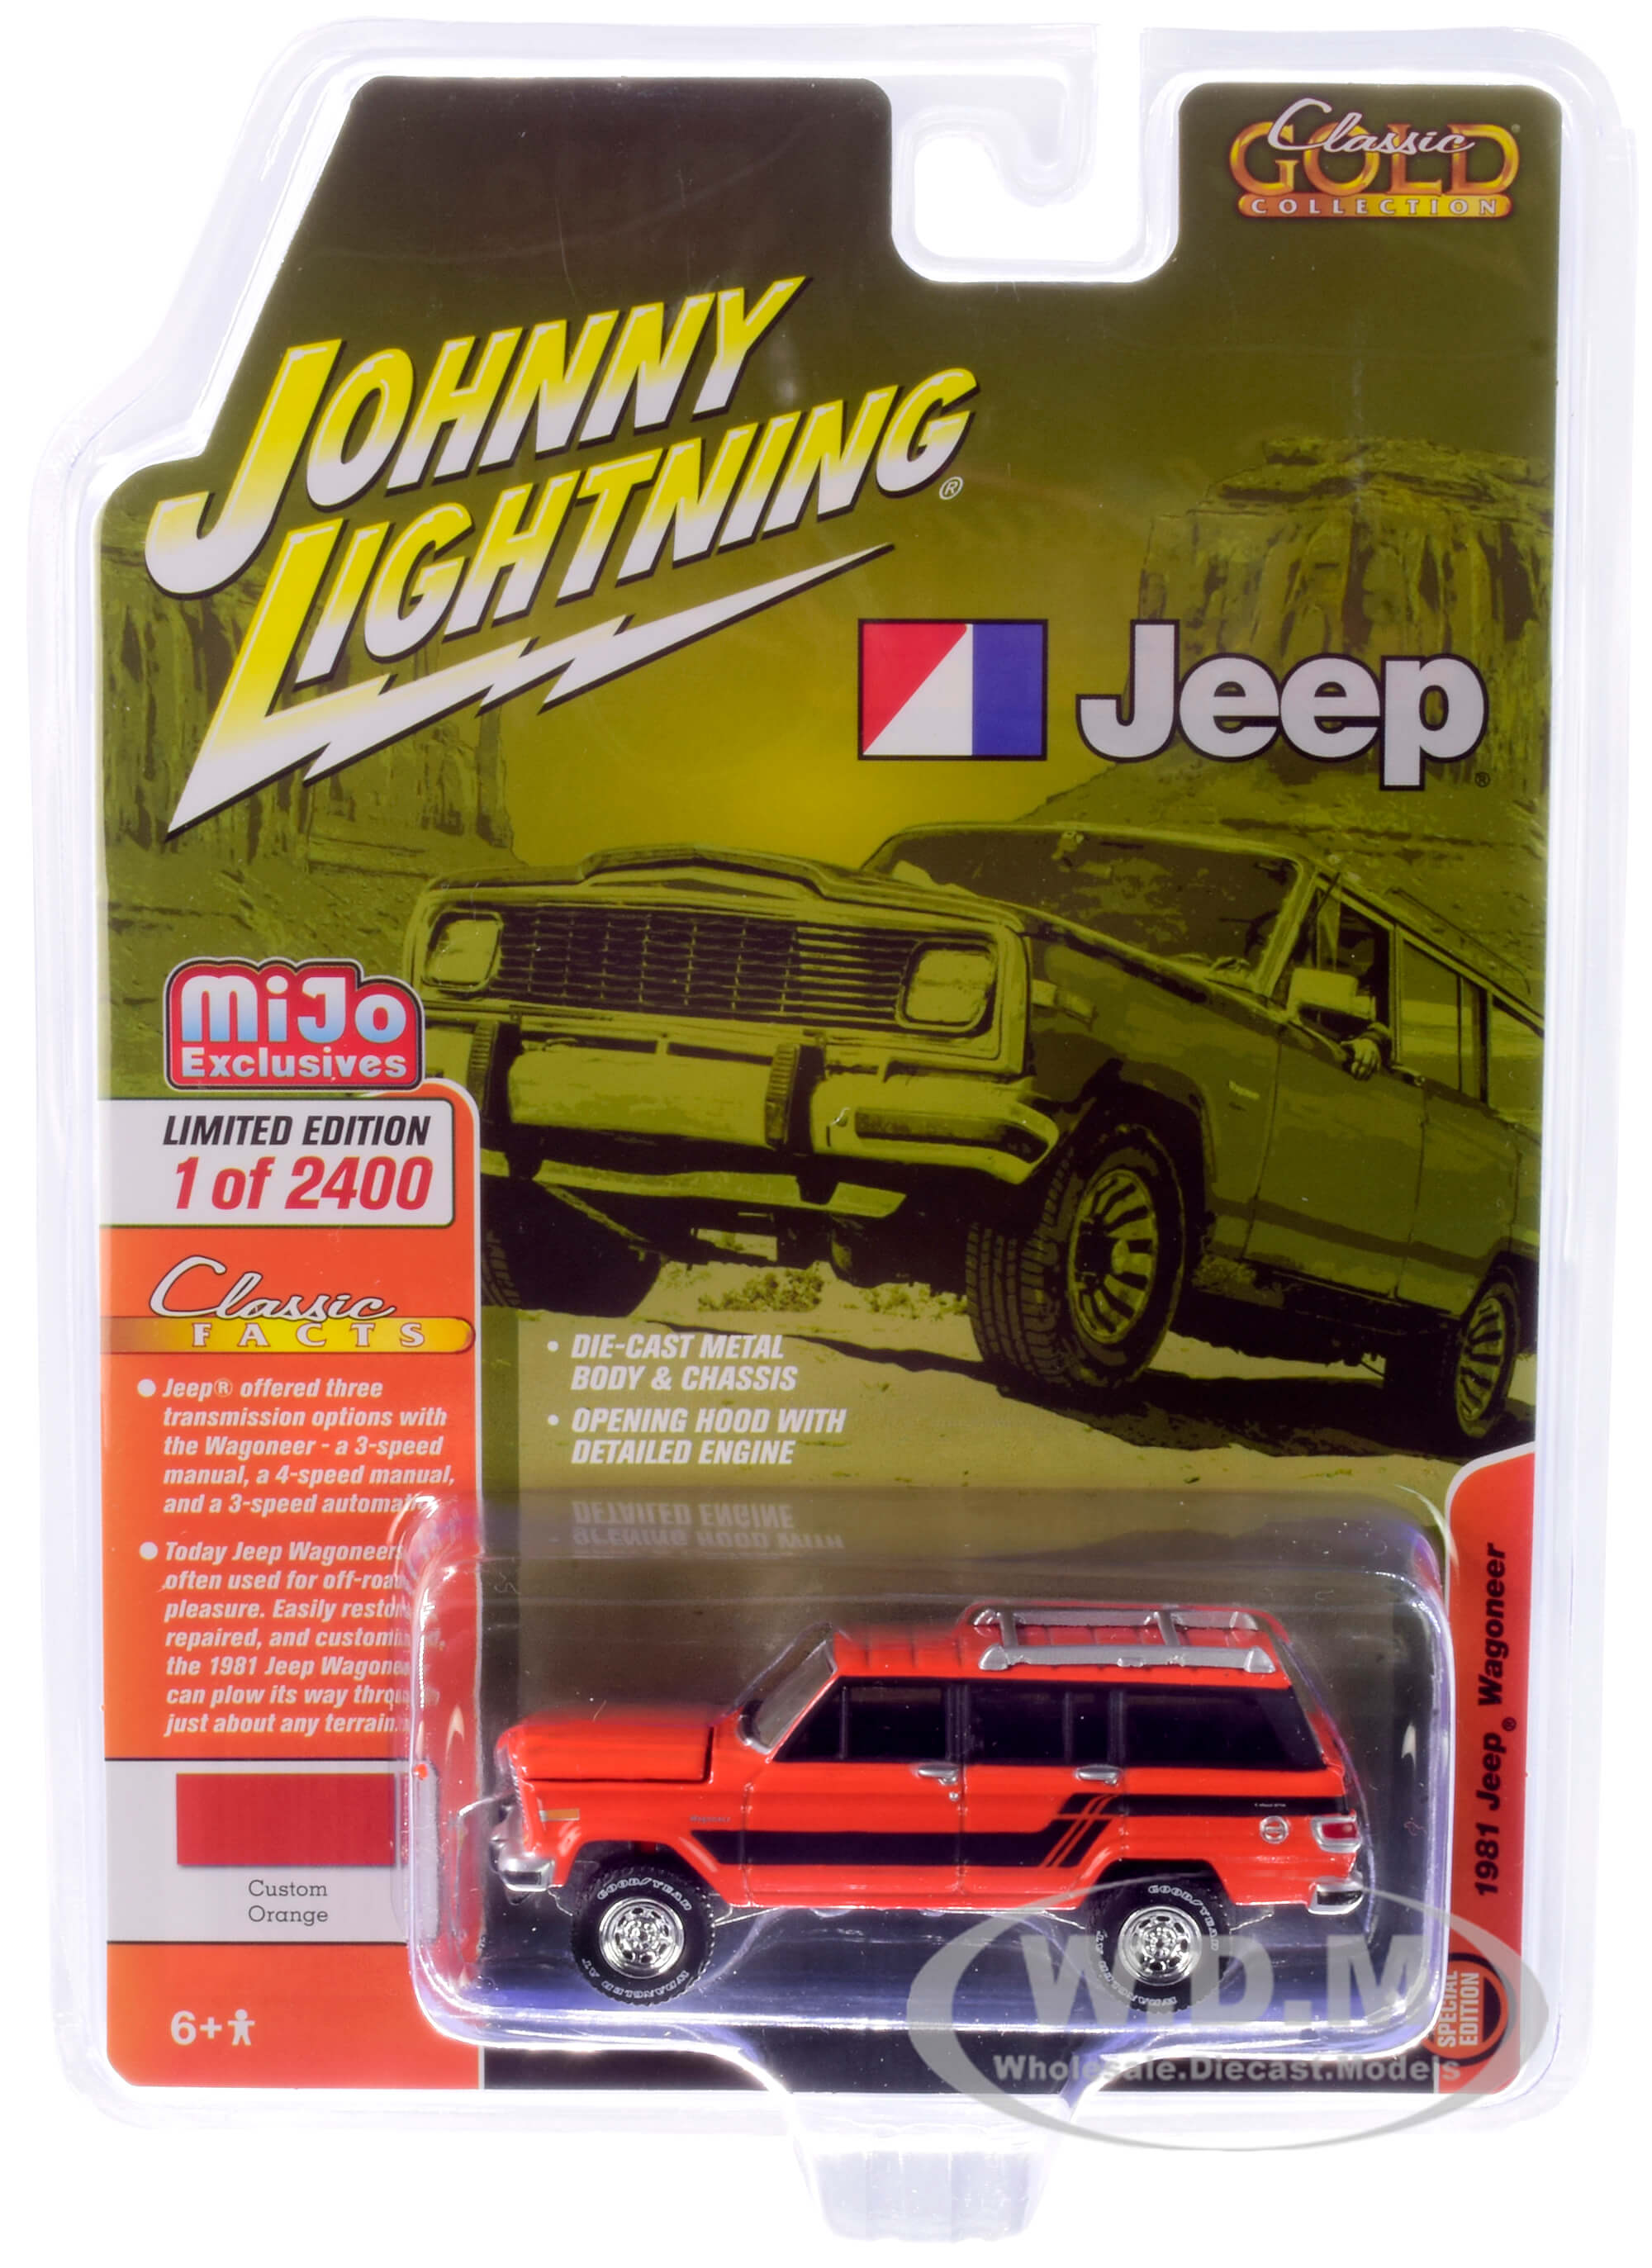 1981 Jeep Wagoneer Custom Orange With Black Stripes Limited Edition To 2400 Pieces Worldwide 1/64 Diecast Model Car By Johnny Lightning